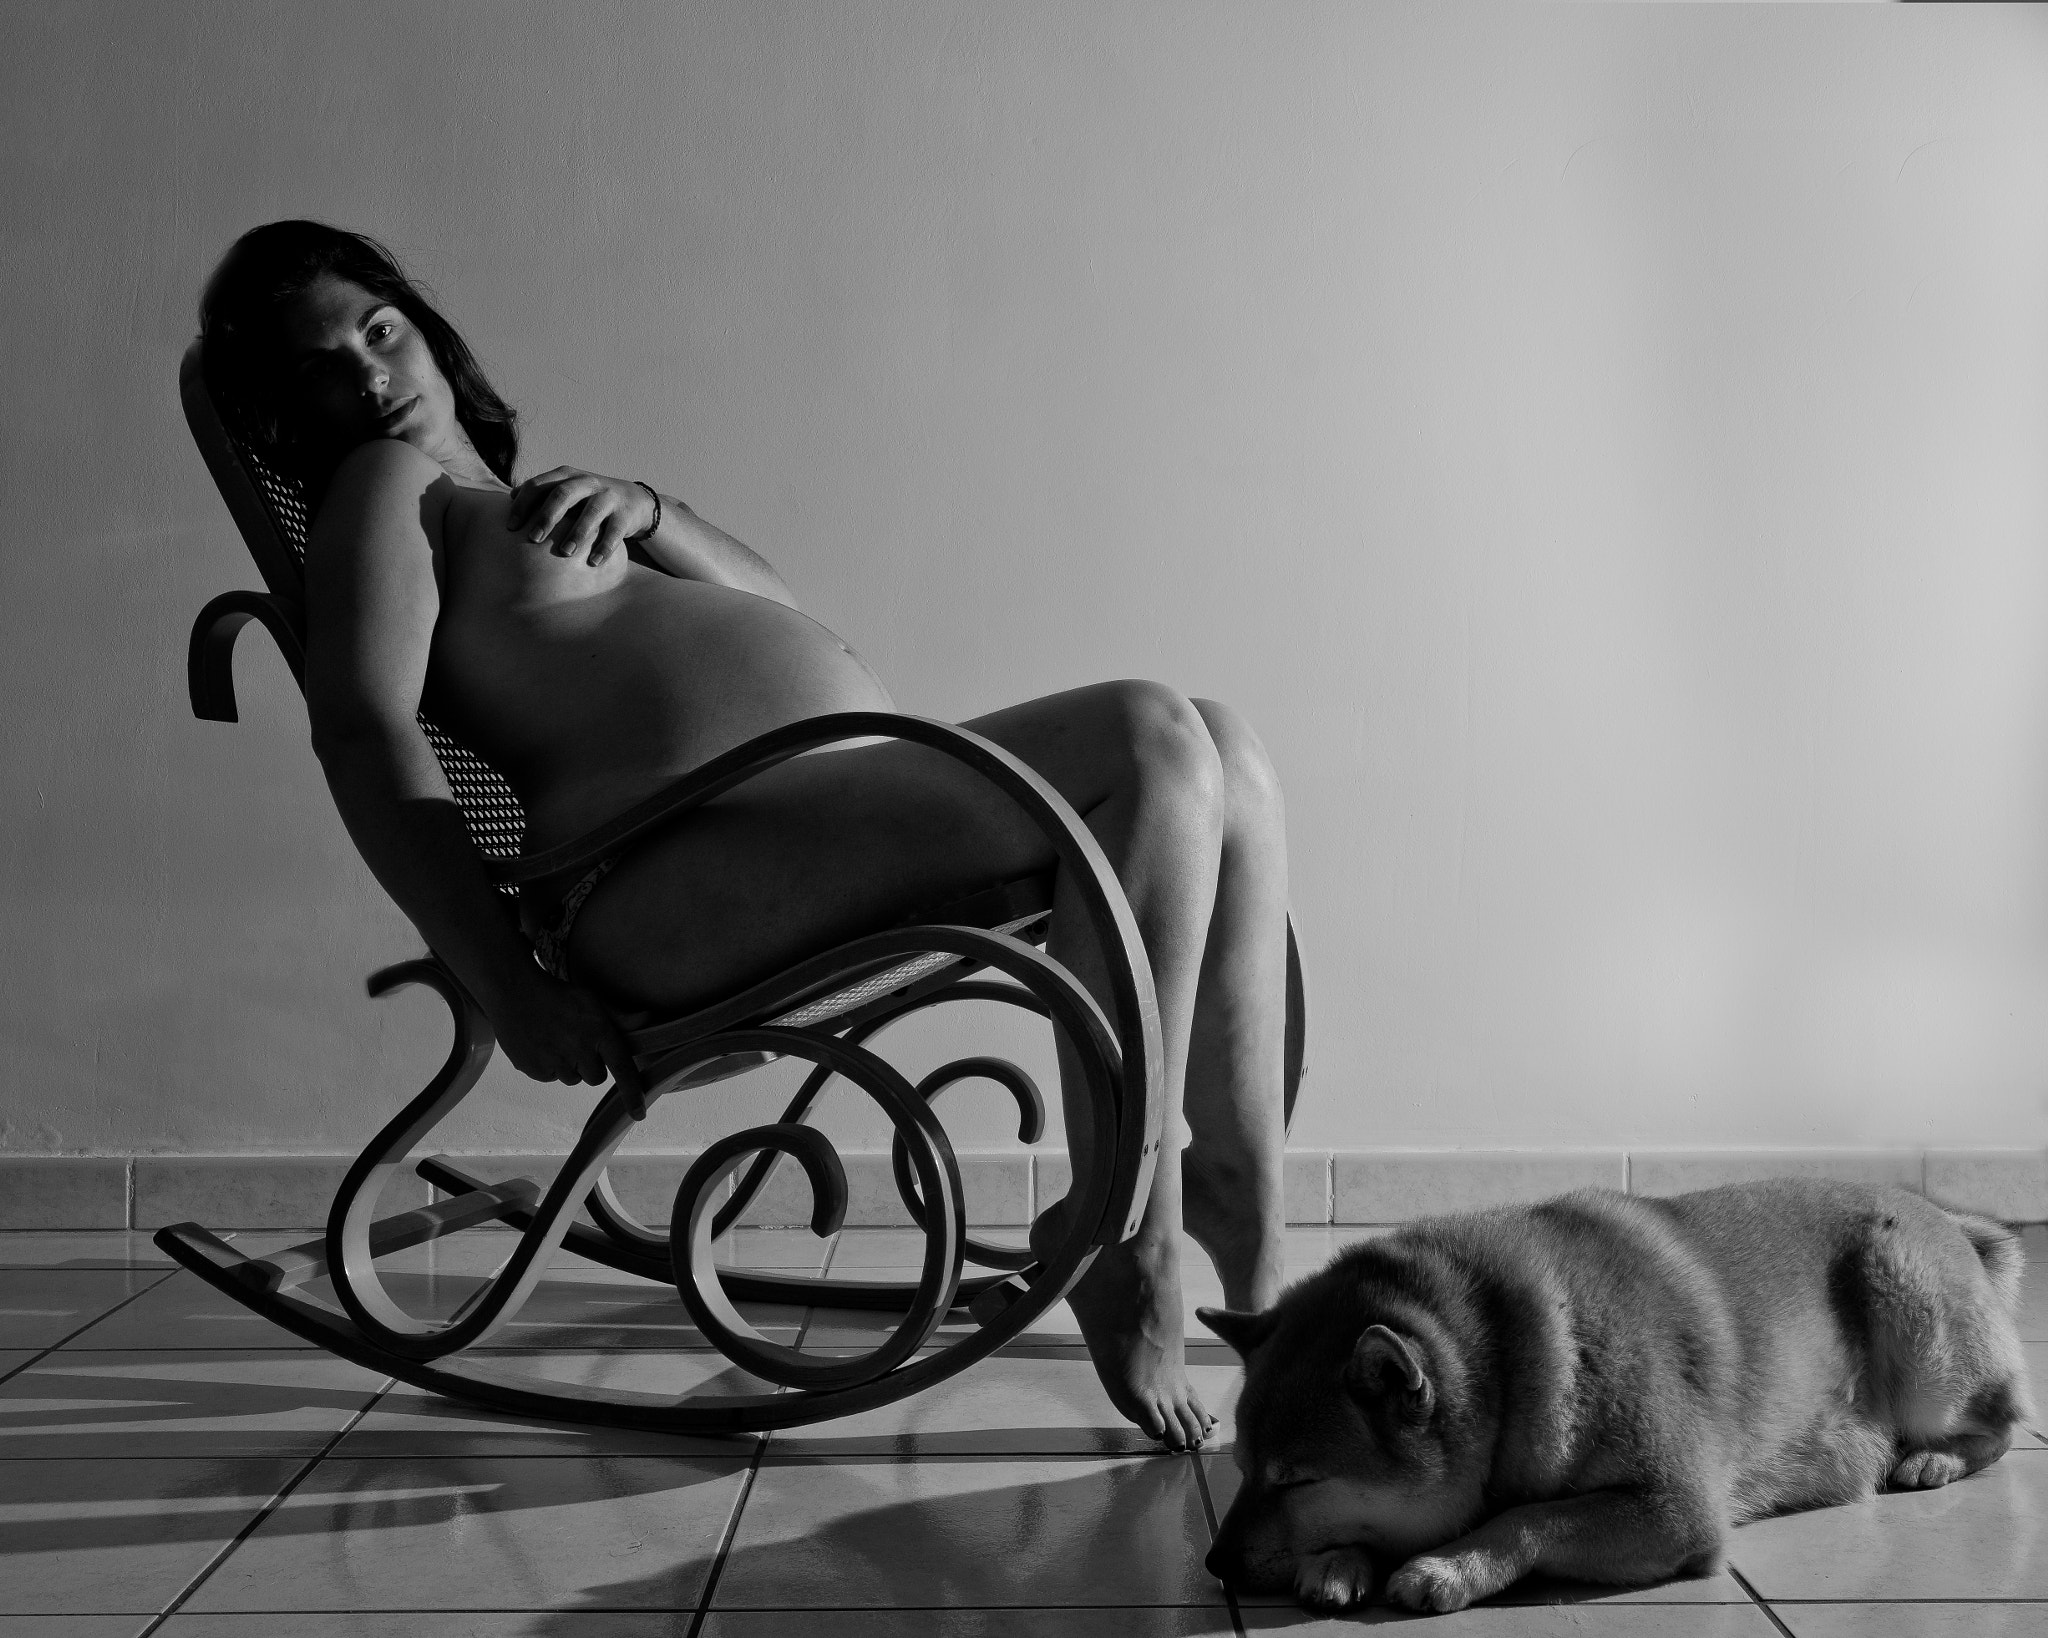 Pentax K-3 + Sigma 18-35mm F1.8 DC HSM Art sample photo. The pregnant woman and her guardian dog photography